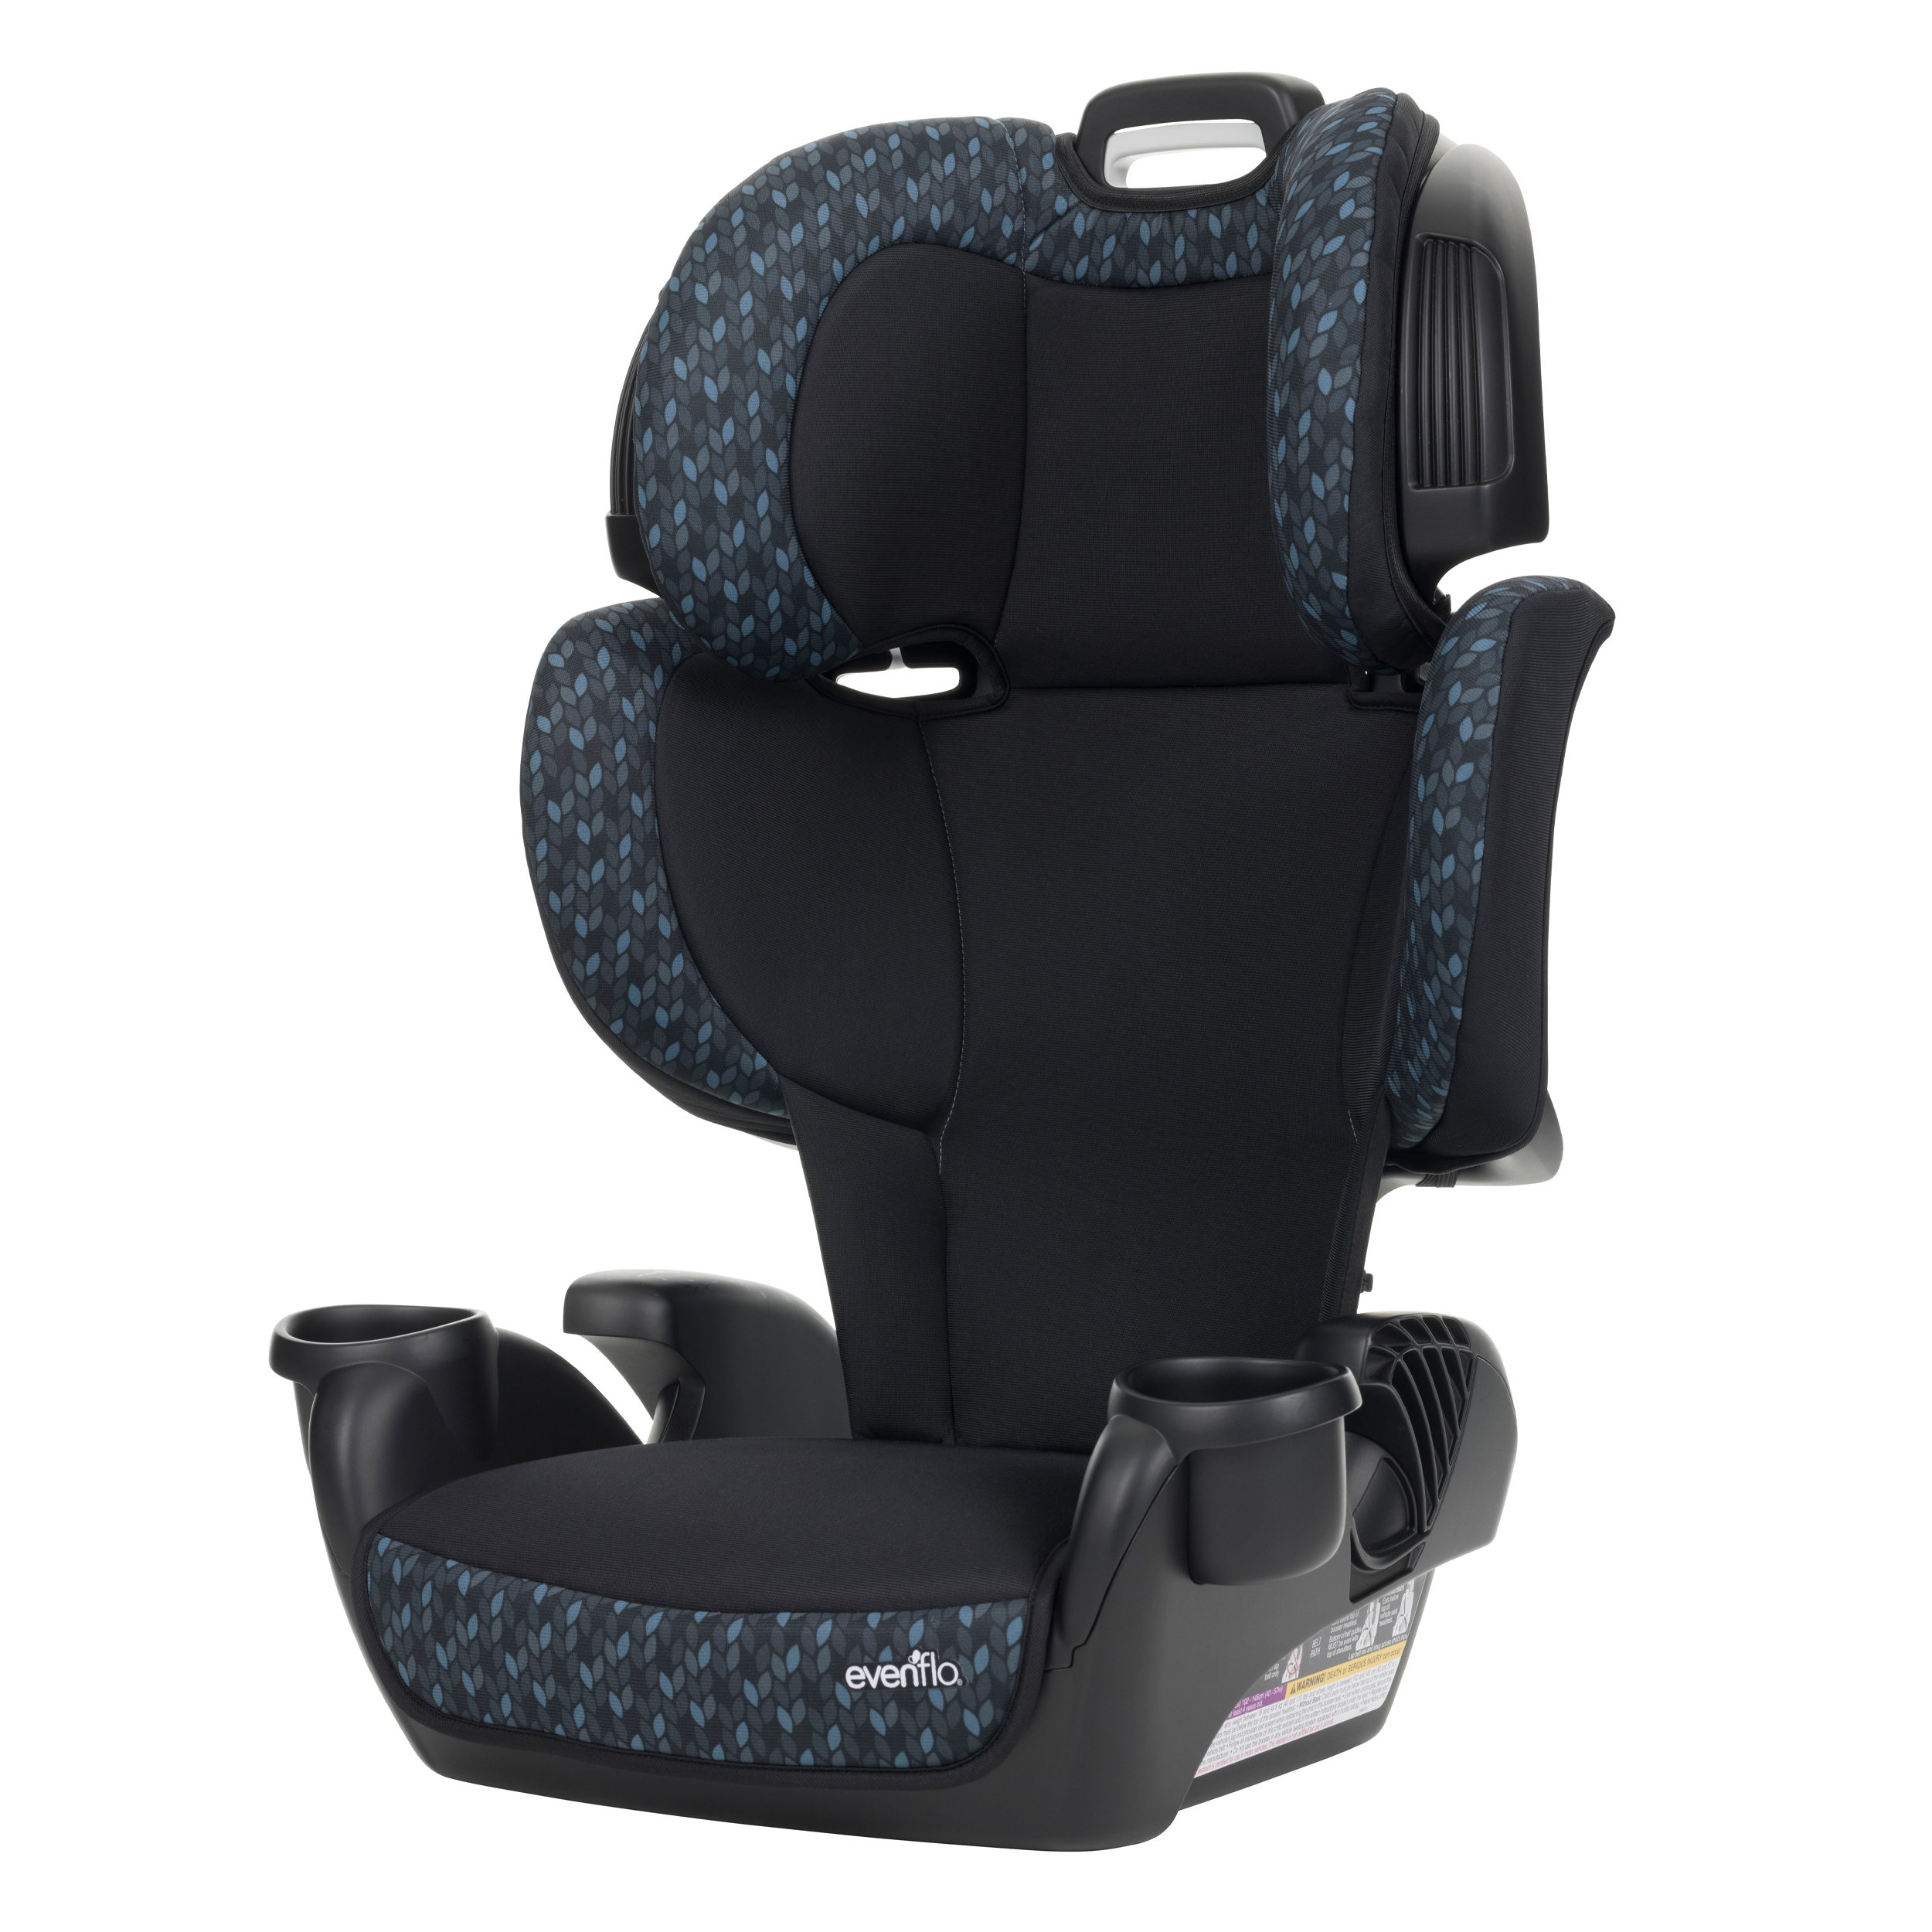 Evenflo GoTime LX Booster Car Seat (Quincy Blue), 4 Years + - image 4 of 12